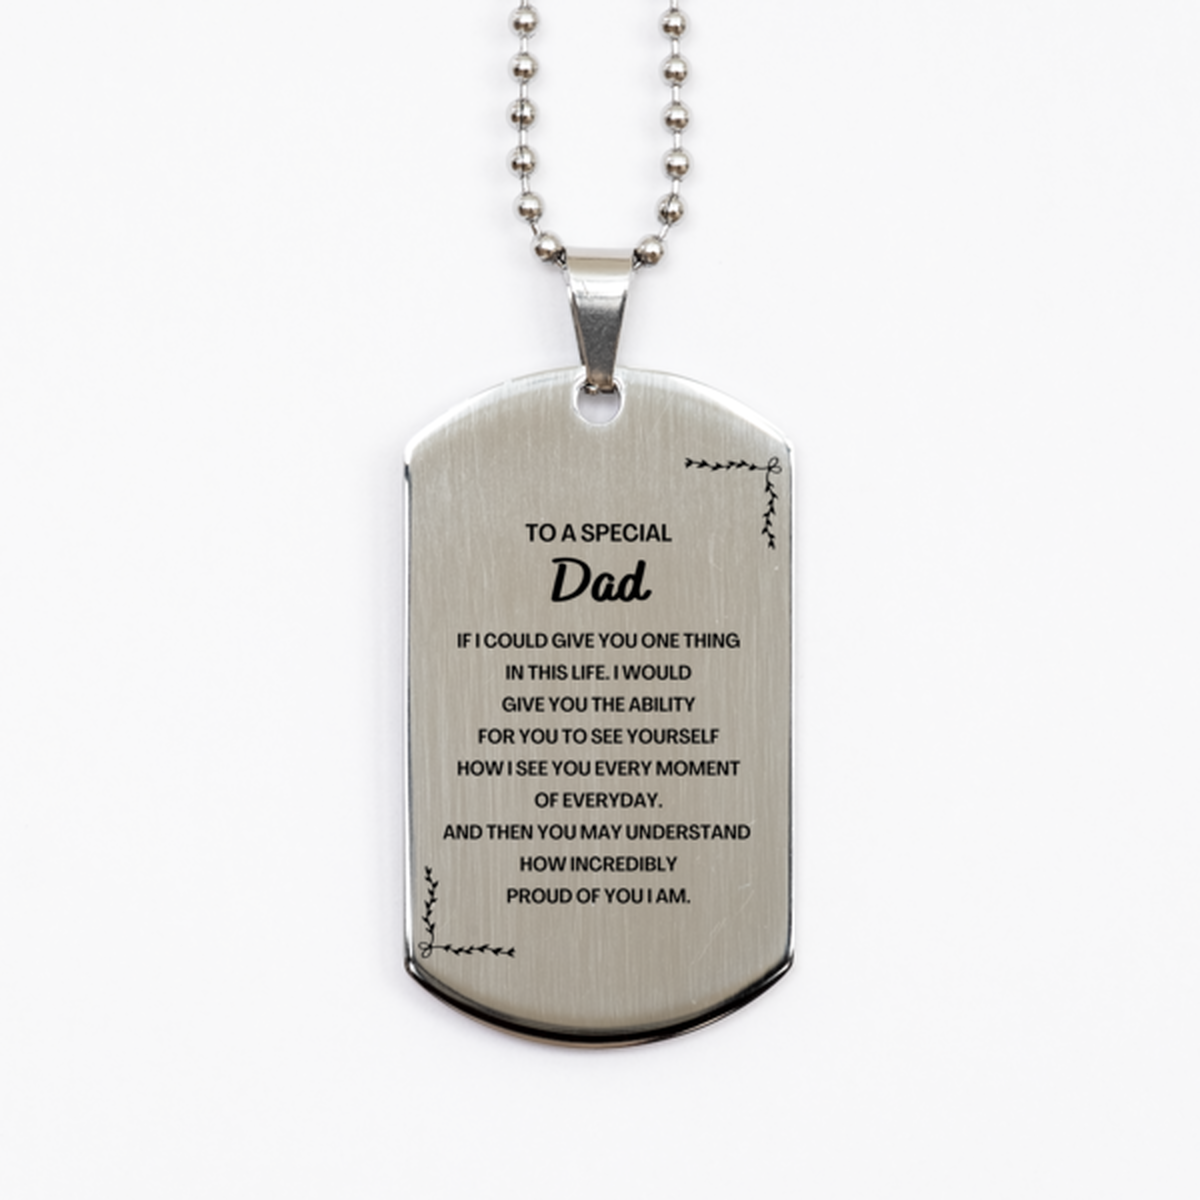 To My Dad Silver Dog Tag, Gifts For Dad Engraved, Inspirational Gifts for Christmas Birthday, Epic Gifts for Dad To A Special Dad how incredibly proud of you I am